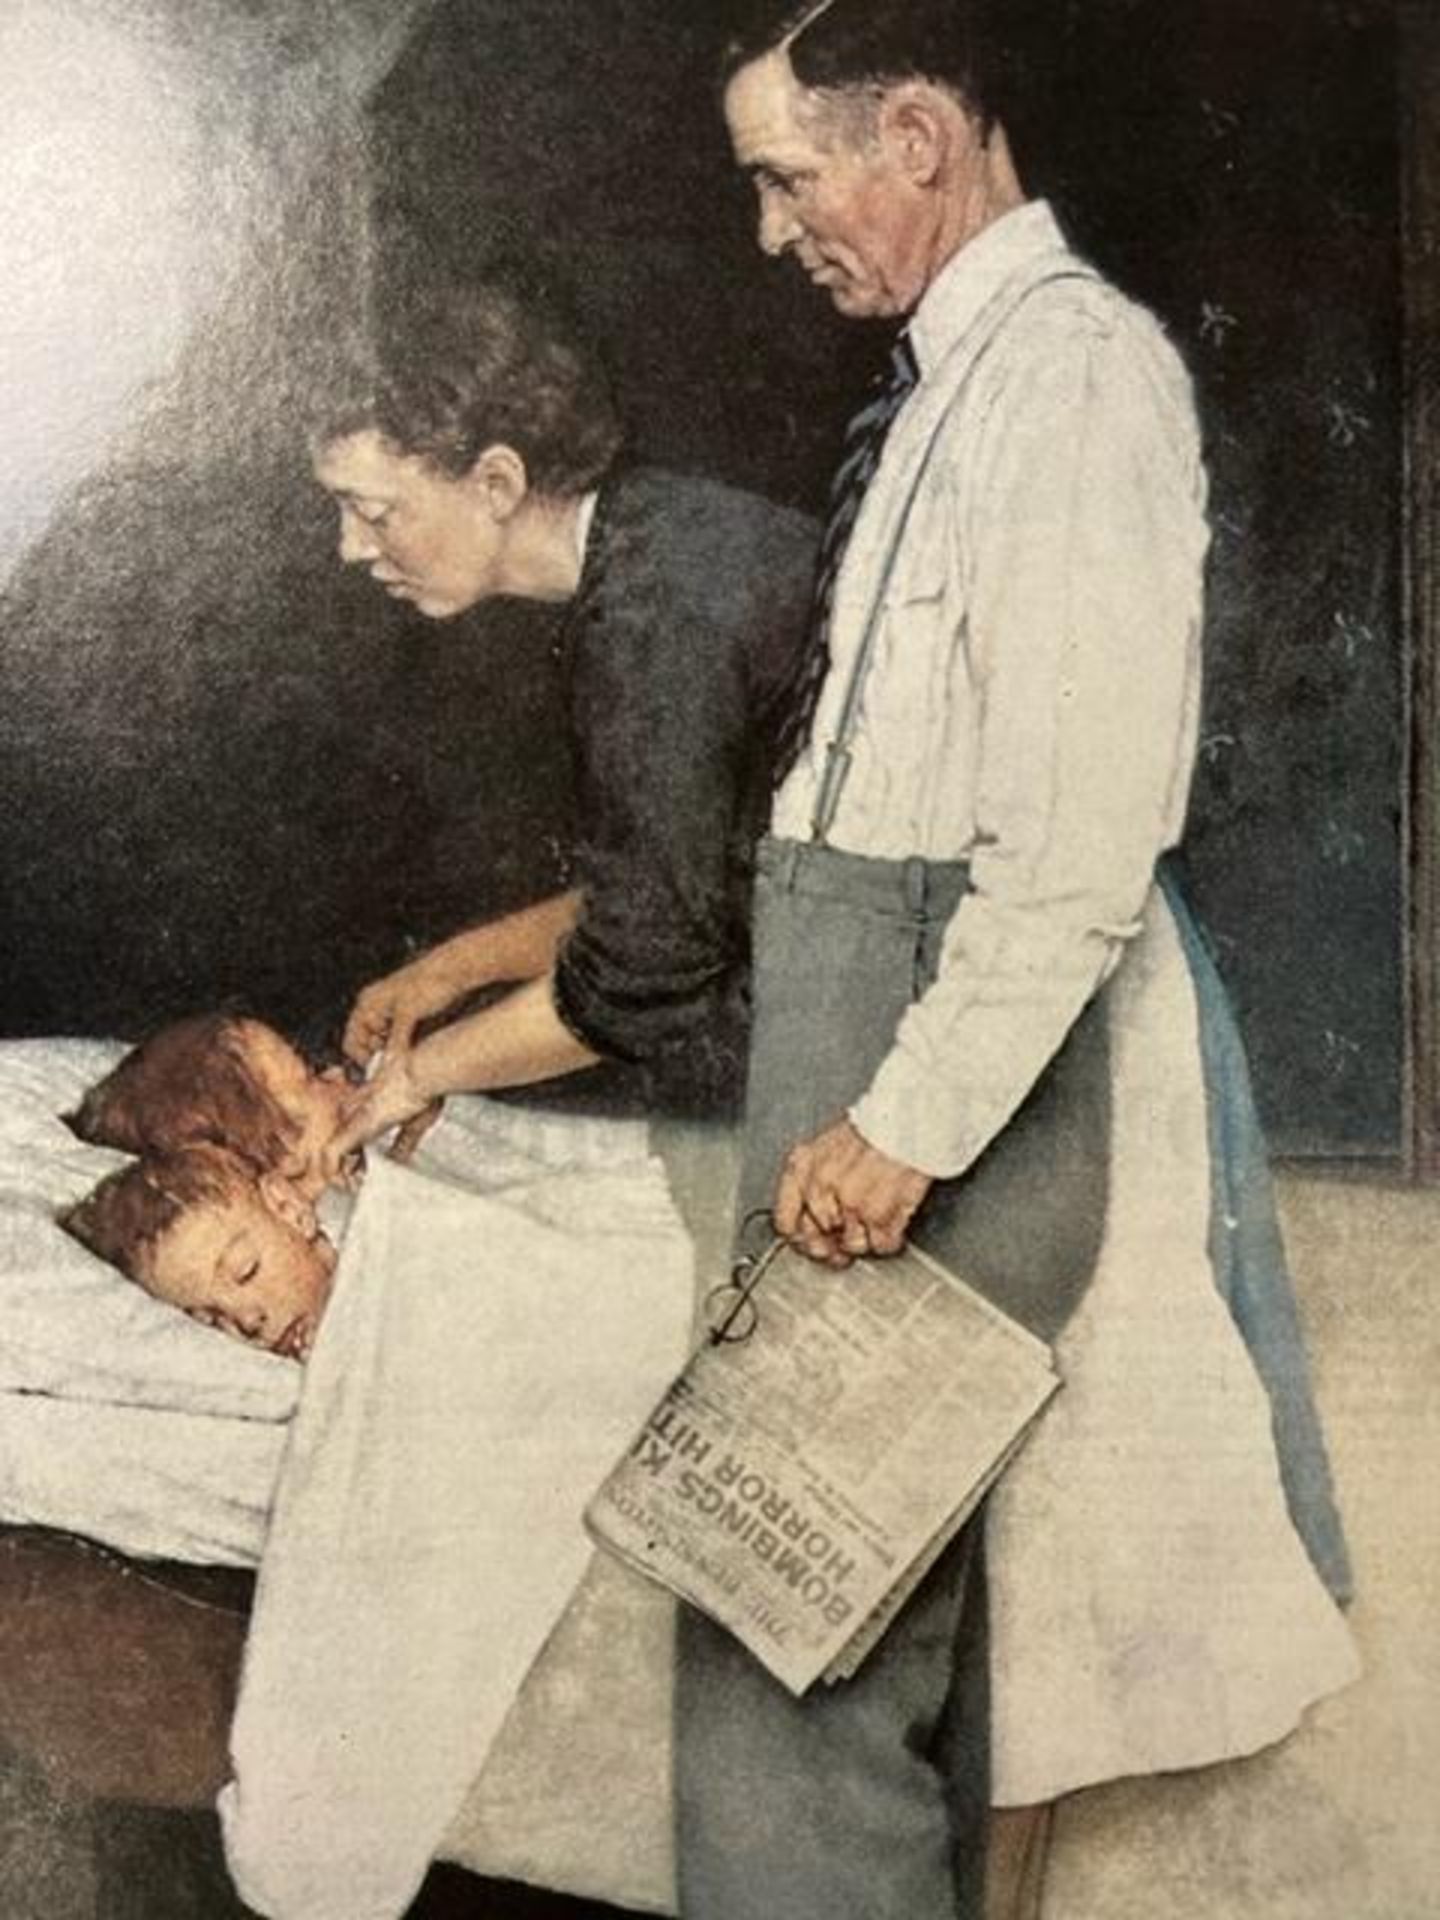 Norman Rockwell "Untitled" Print. - Image 3 of 6